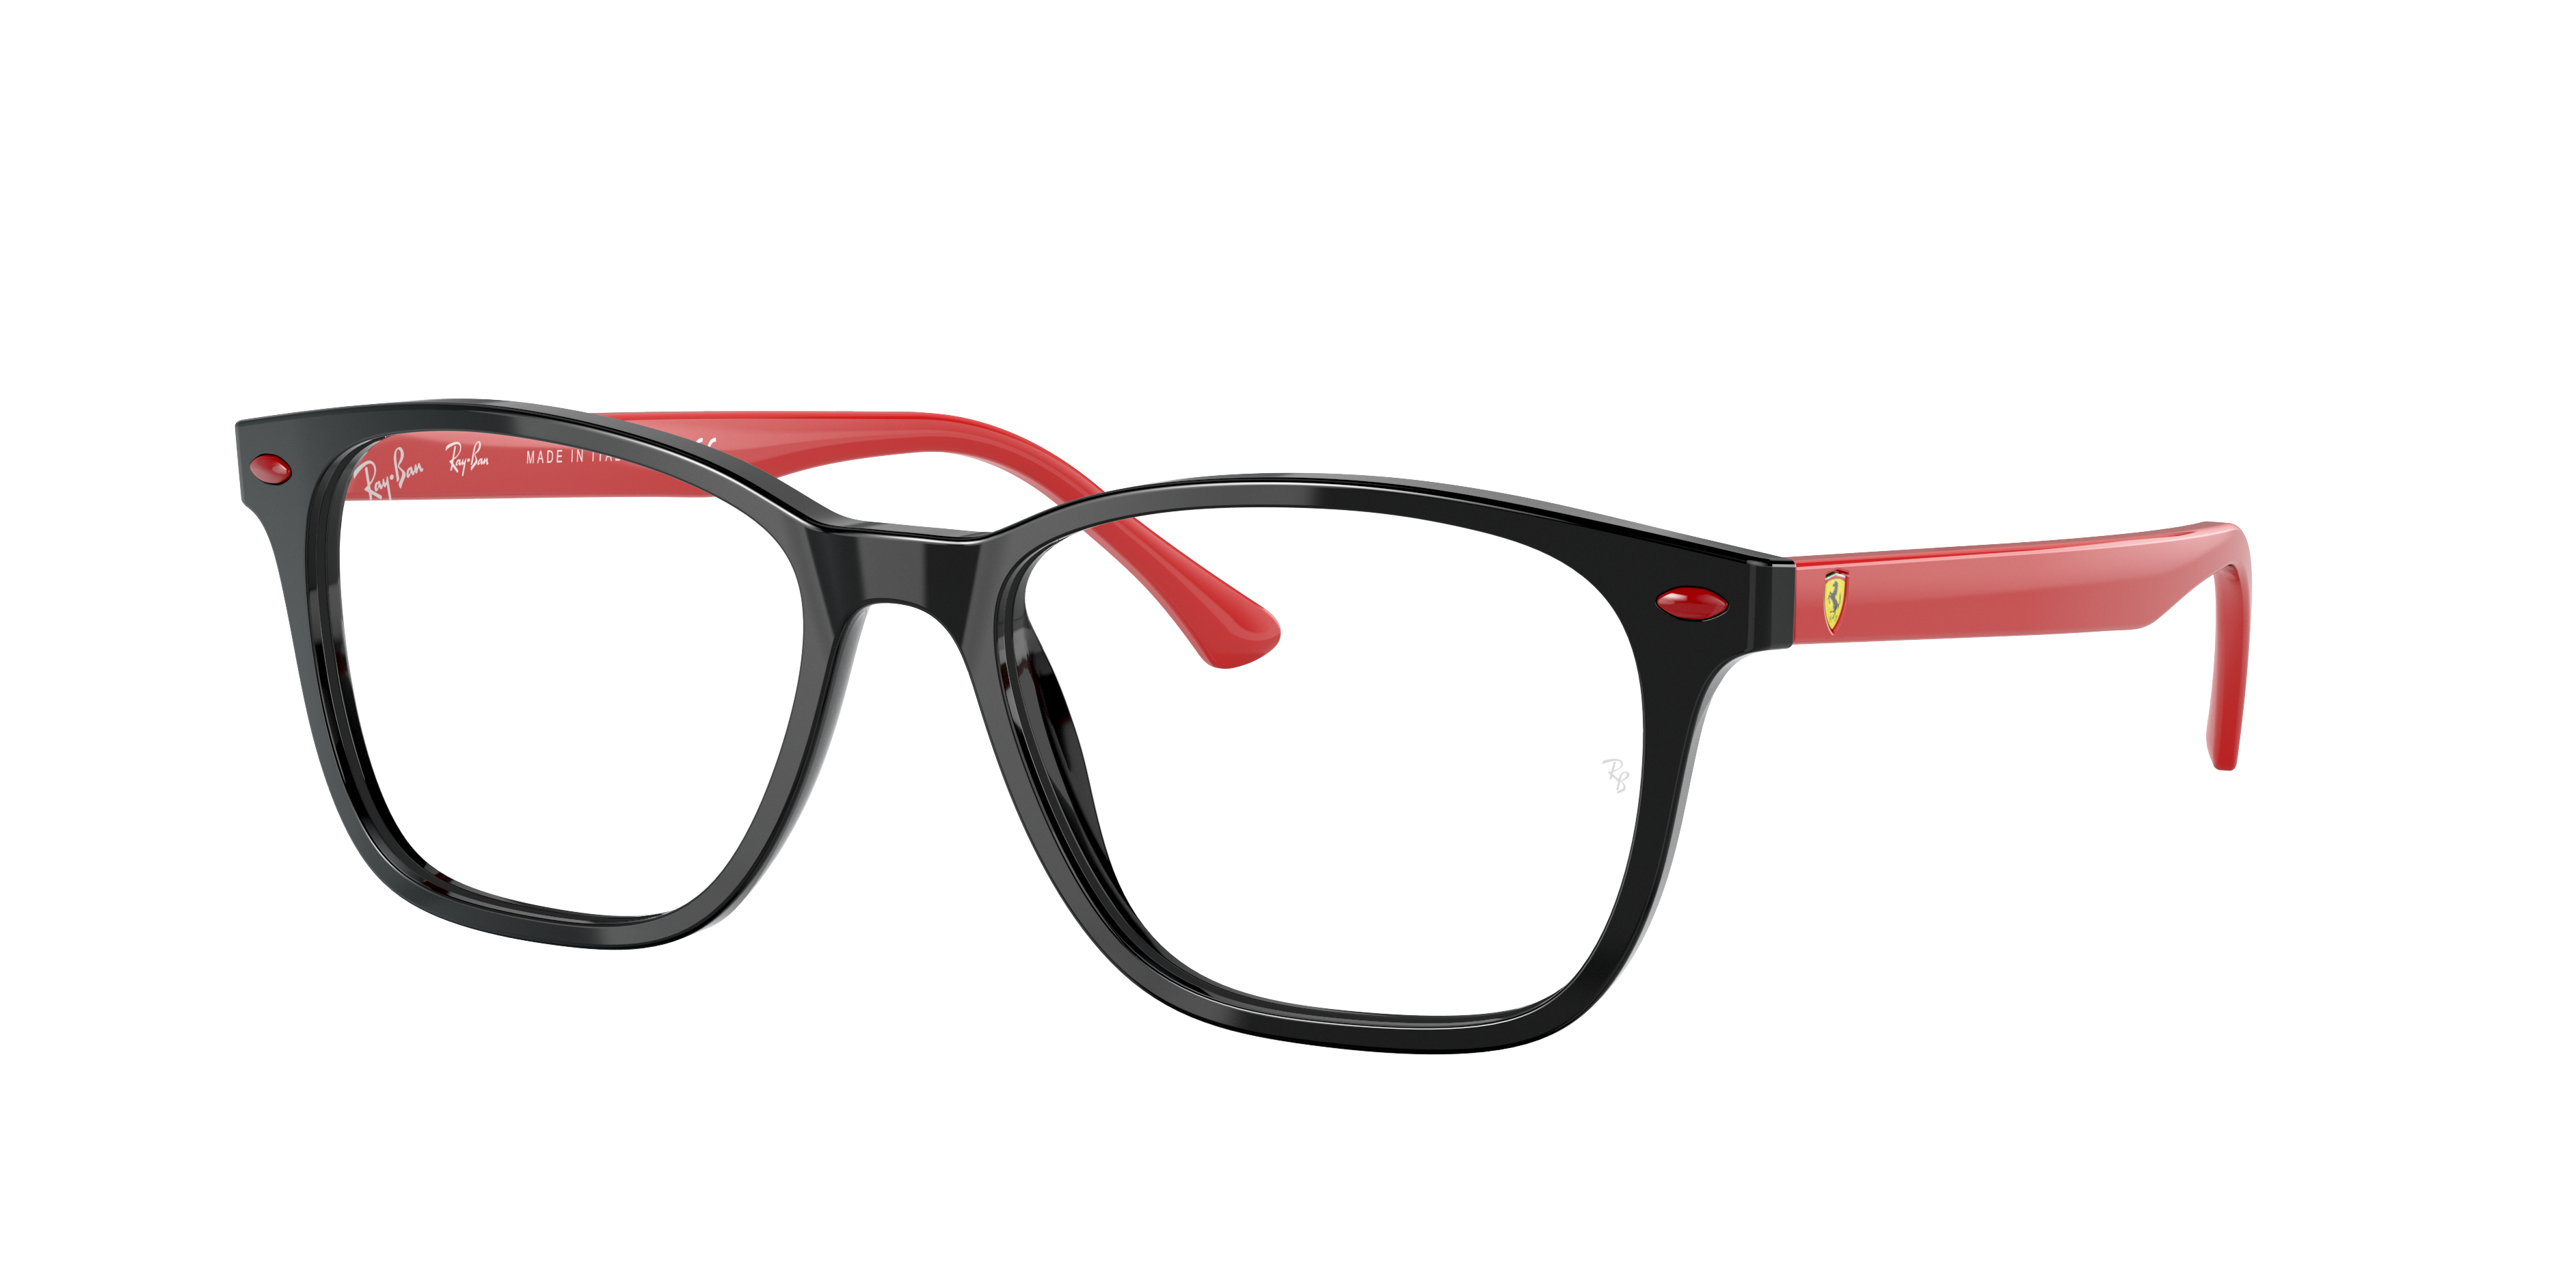 Rb5405m Scuderia Ferrari Collection Eyeglasses with Black Frame | Ray-Ban®